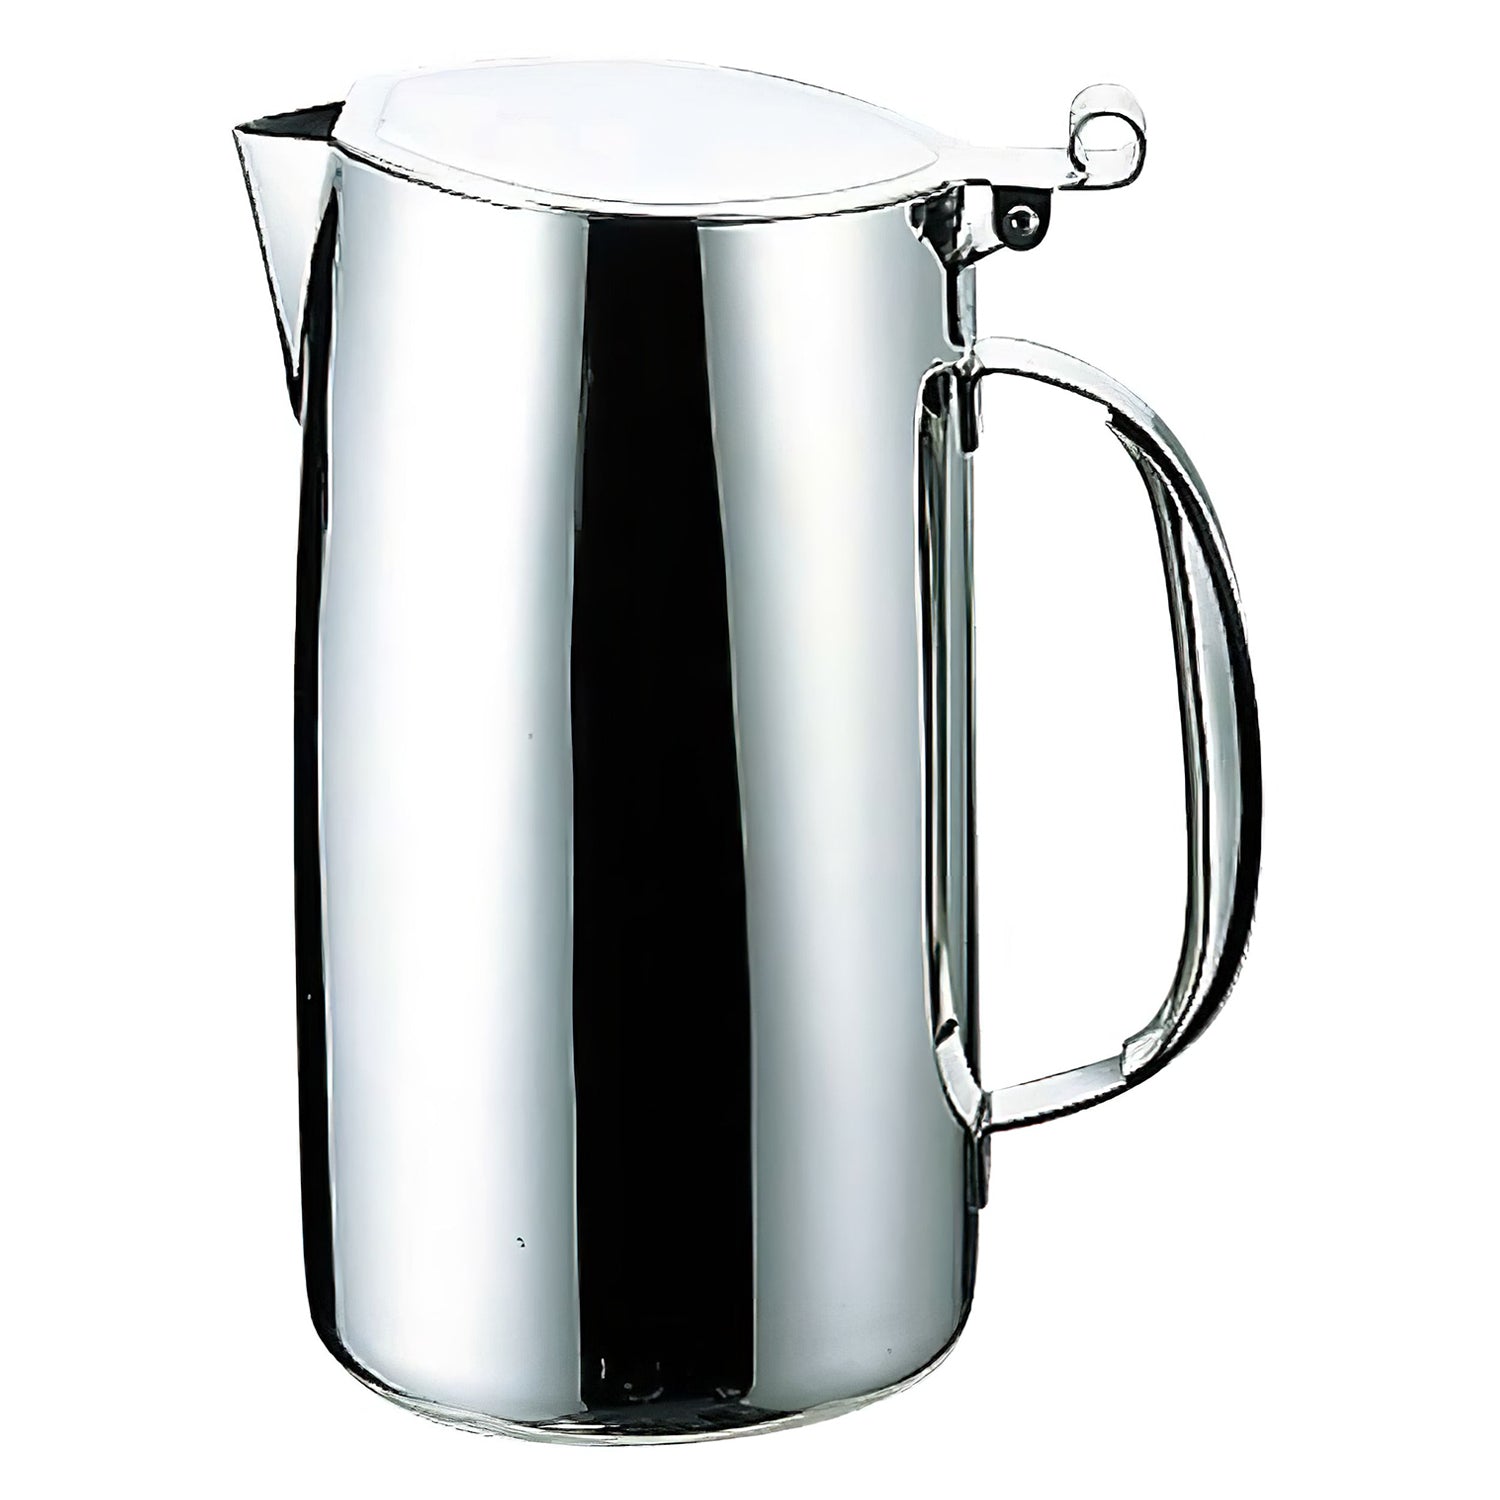 https://cdn.shopify.com/s/files/1/1610/3863/products/NozakiStainlessSteelWaterPitcher1.8L951272_1600x.jpg?v=1659663502